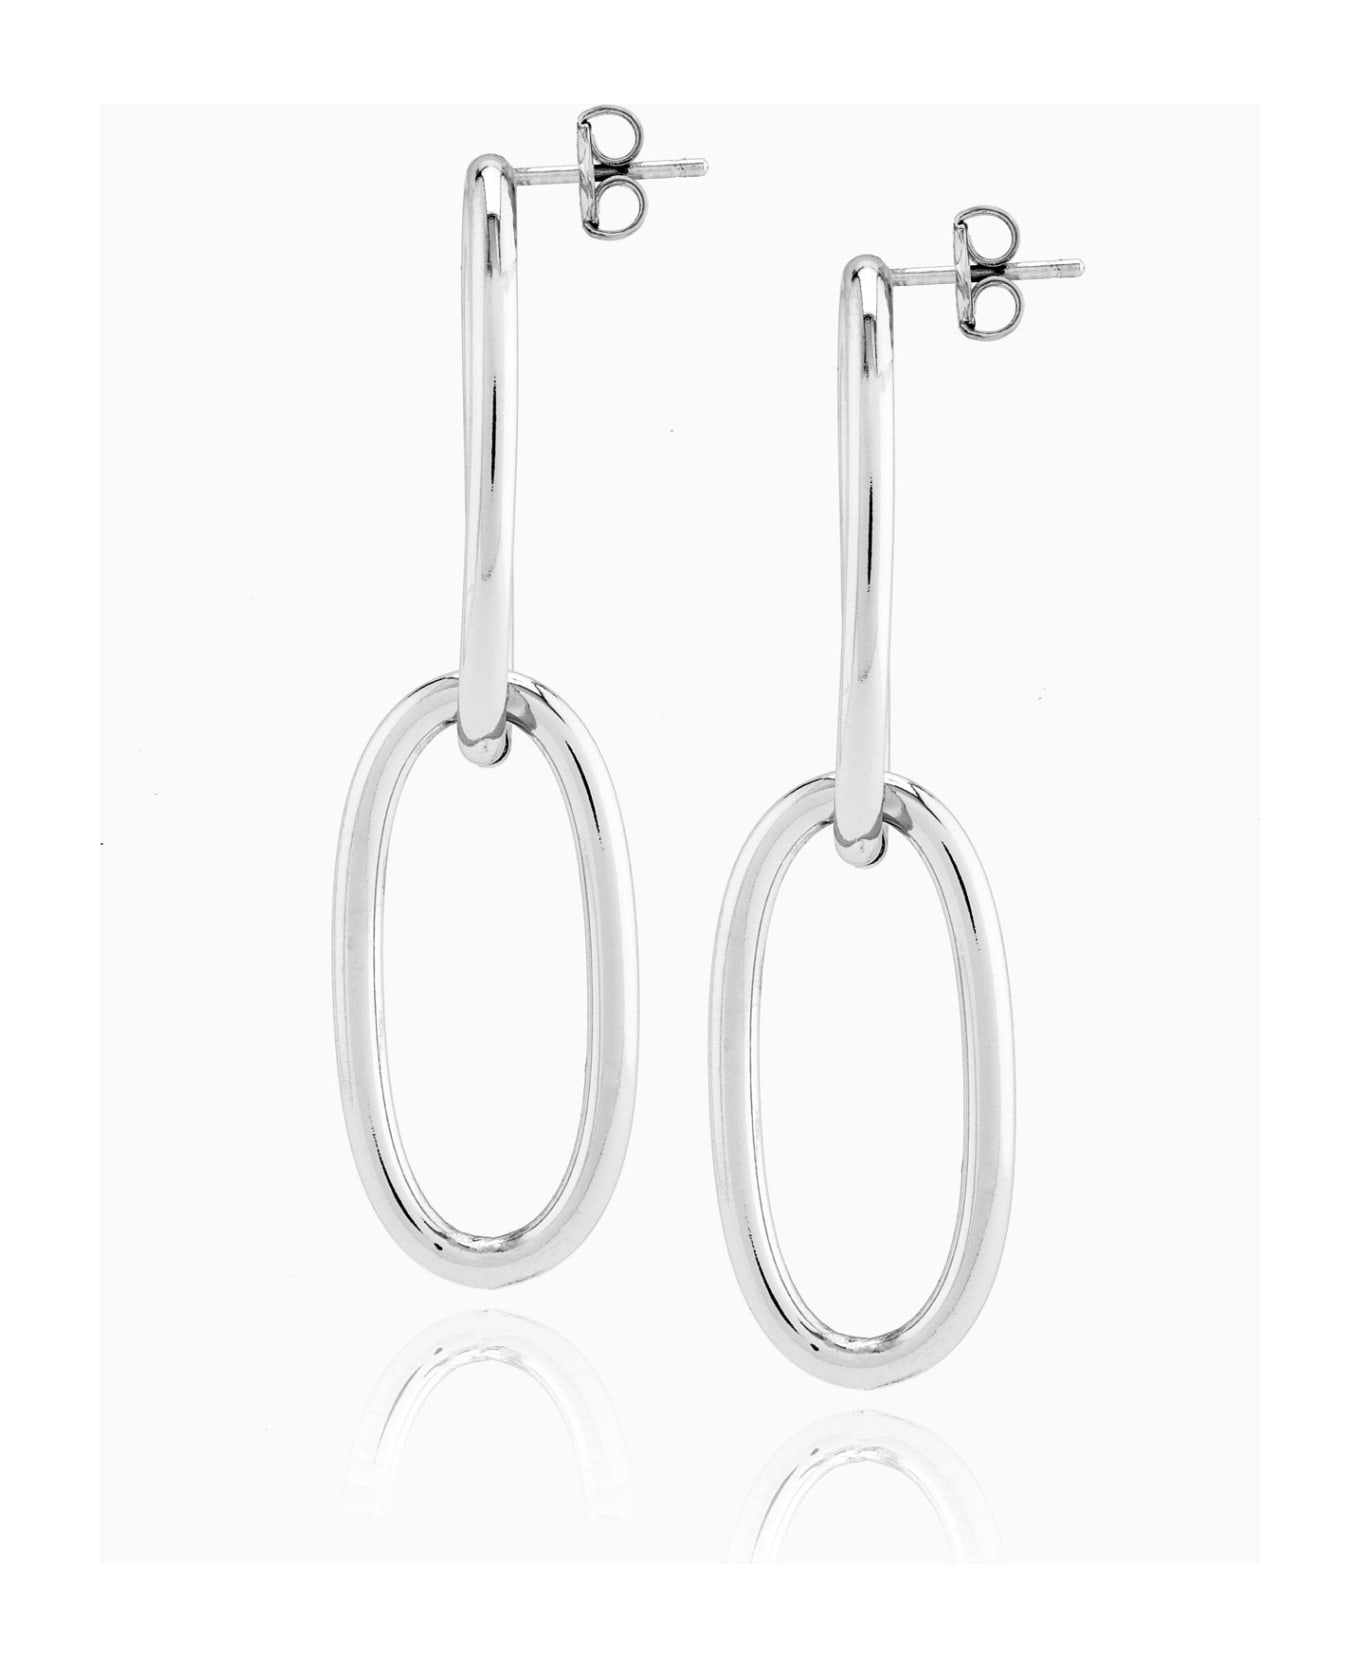 Federica Tosi Earring New Bolt Silver - SILVER